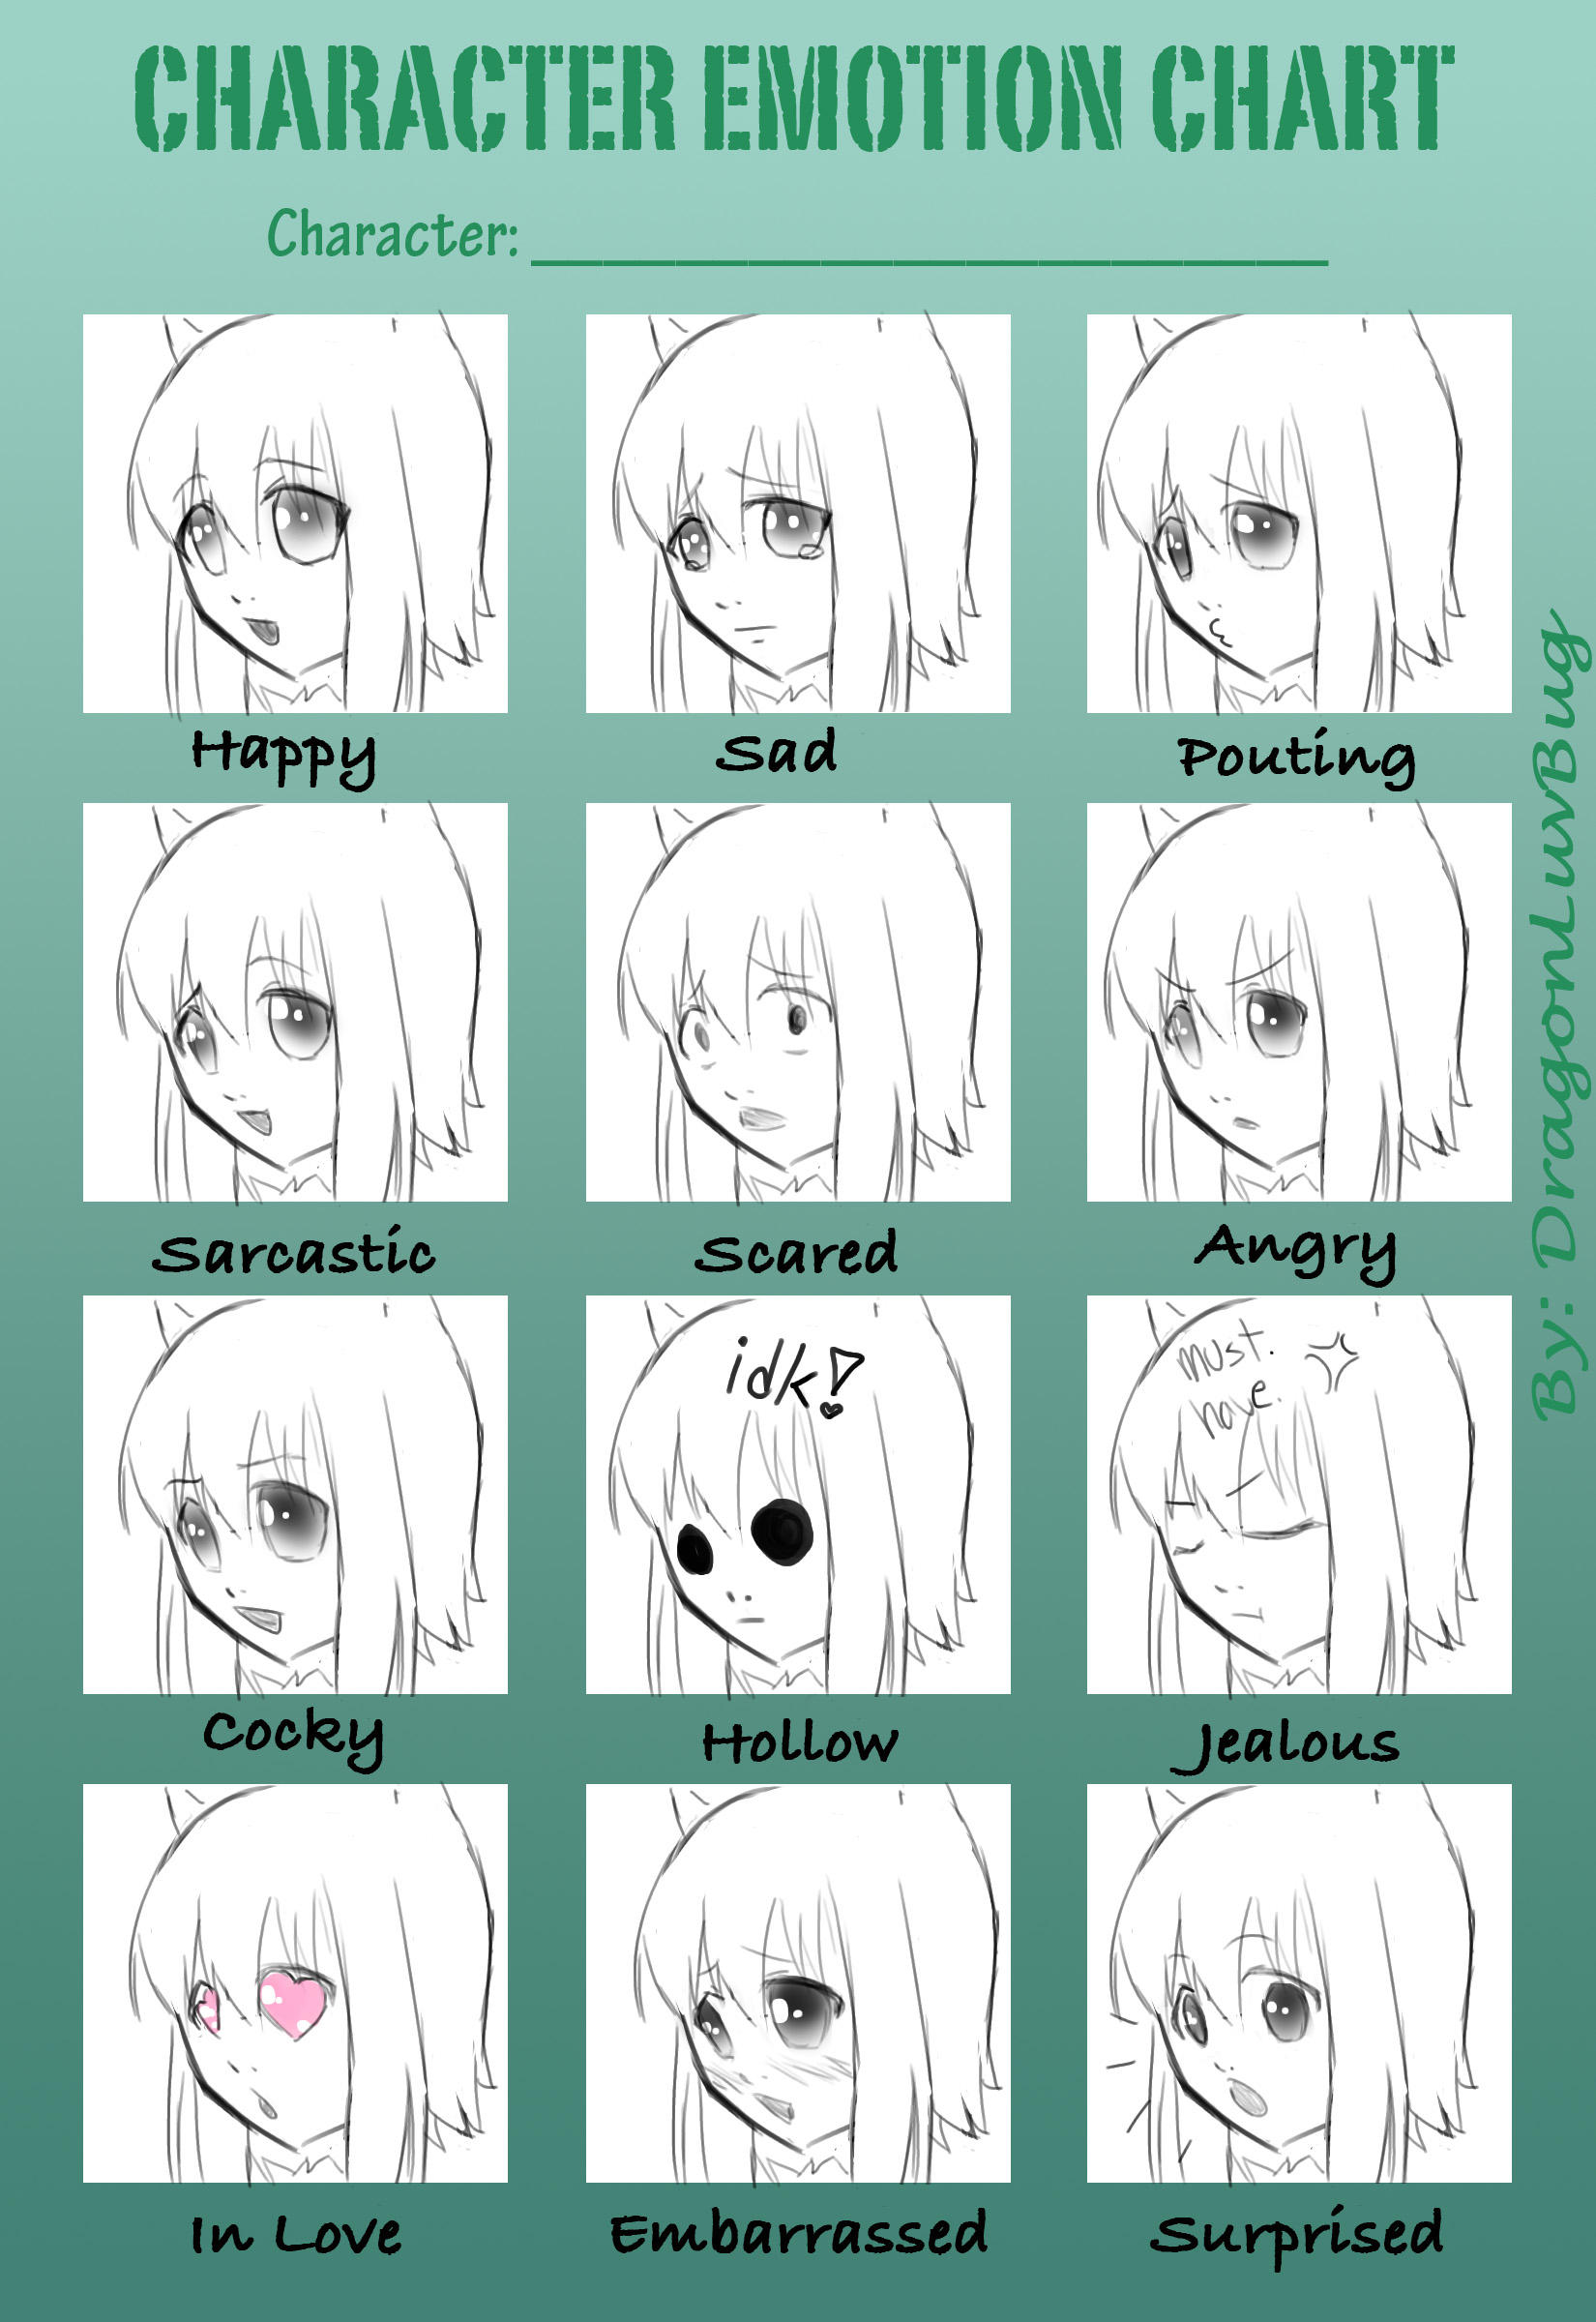 Expression Chart by keikochan13 on DeviantArt.